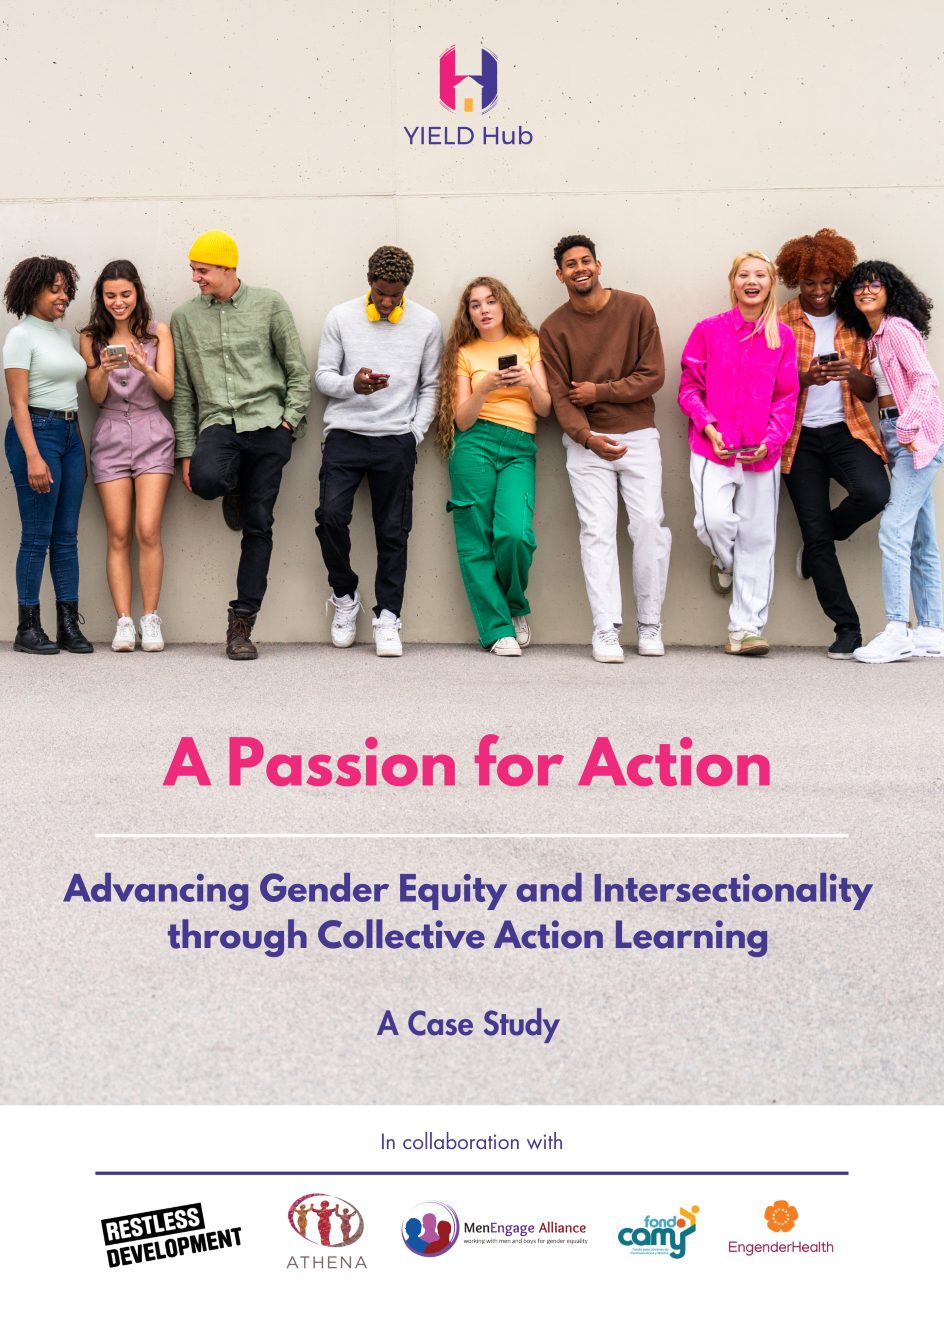 Case Study: Advancing Gender Equity and Intersectionality through Collective Action Learning